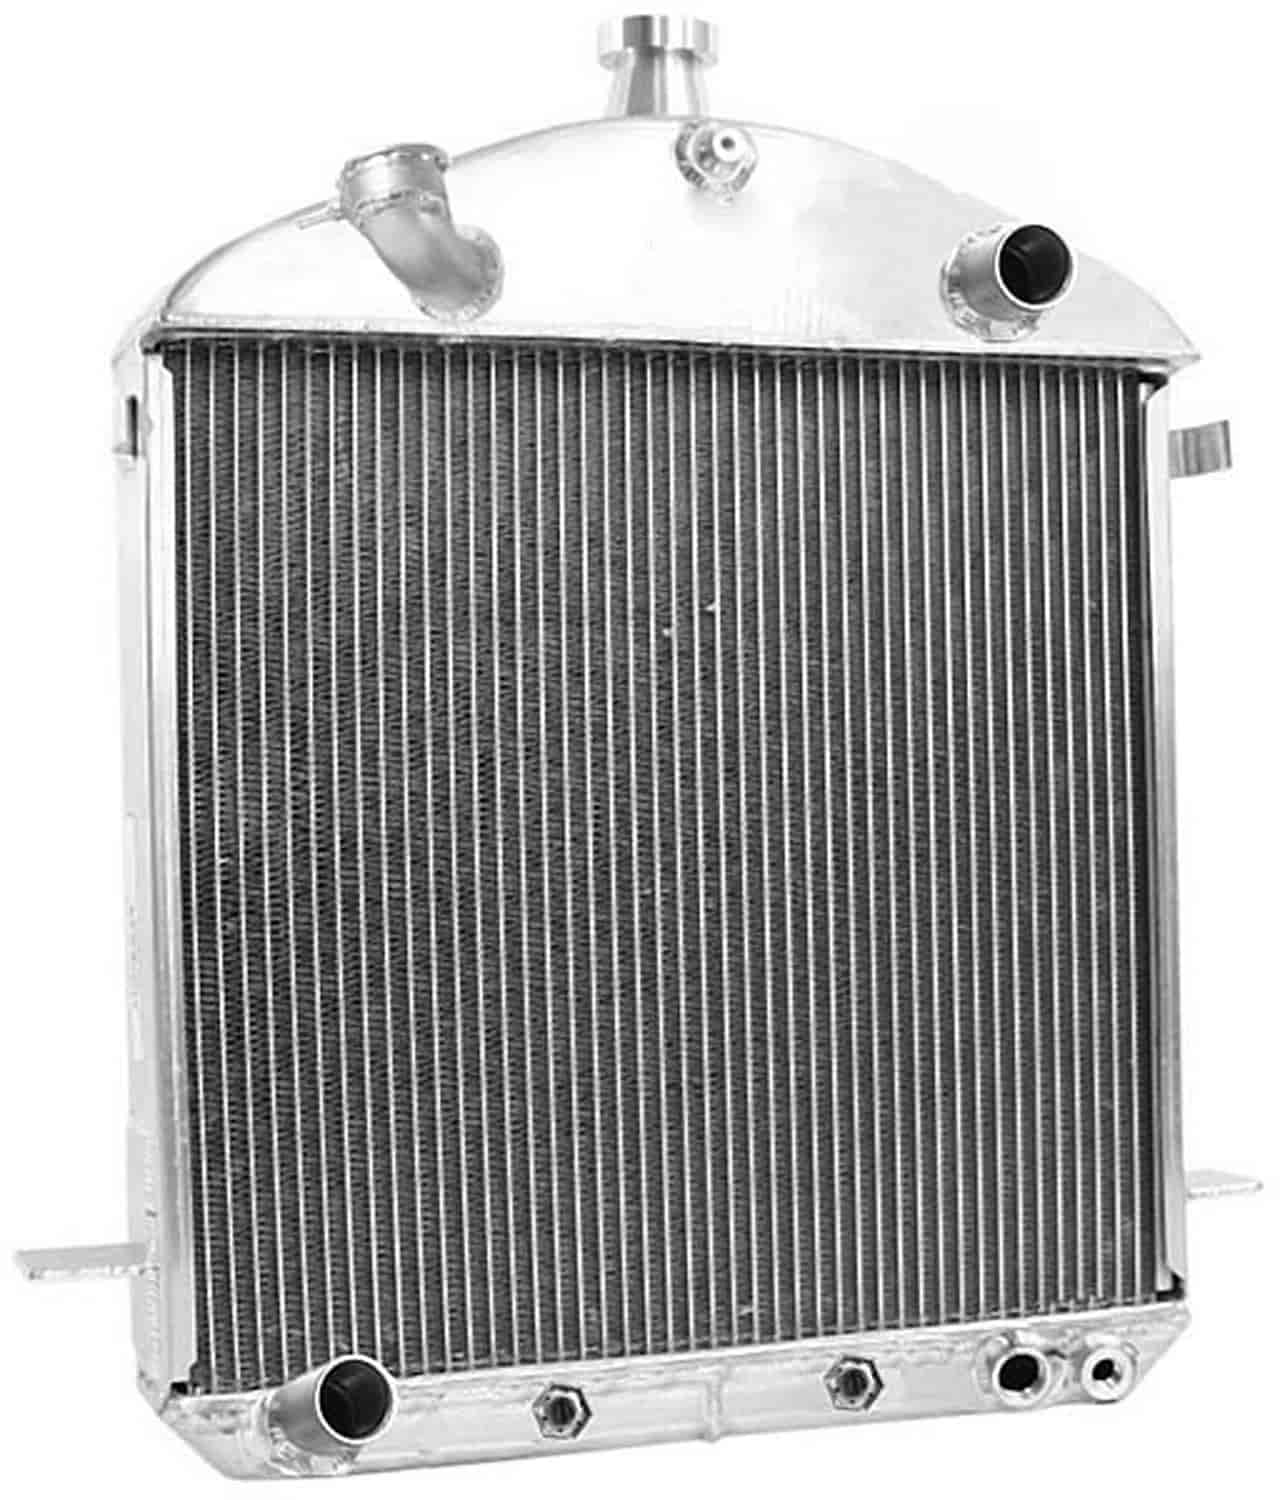 ExactFit Radiator for 1927 Model T with Late Small Block & Big Block